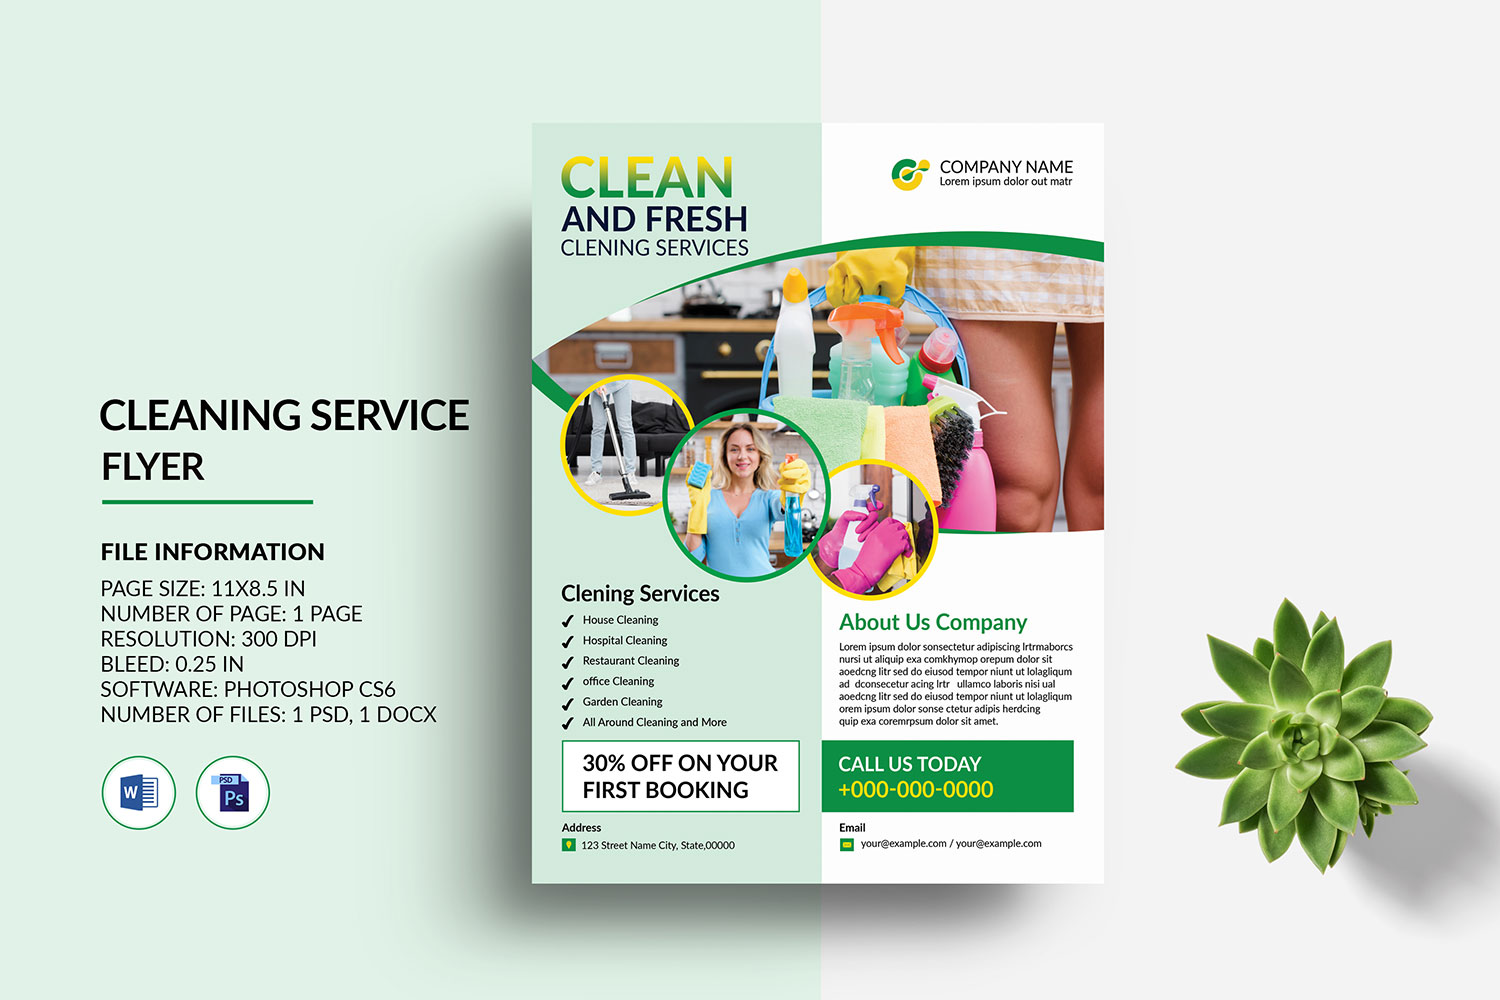 Cleaning Services Flyer , Disinfection service flyer